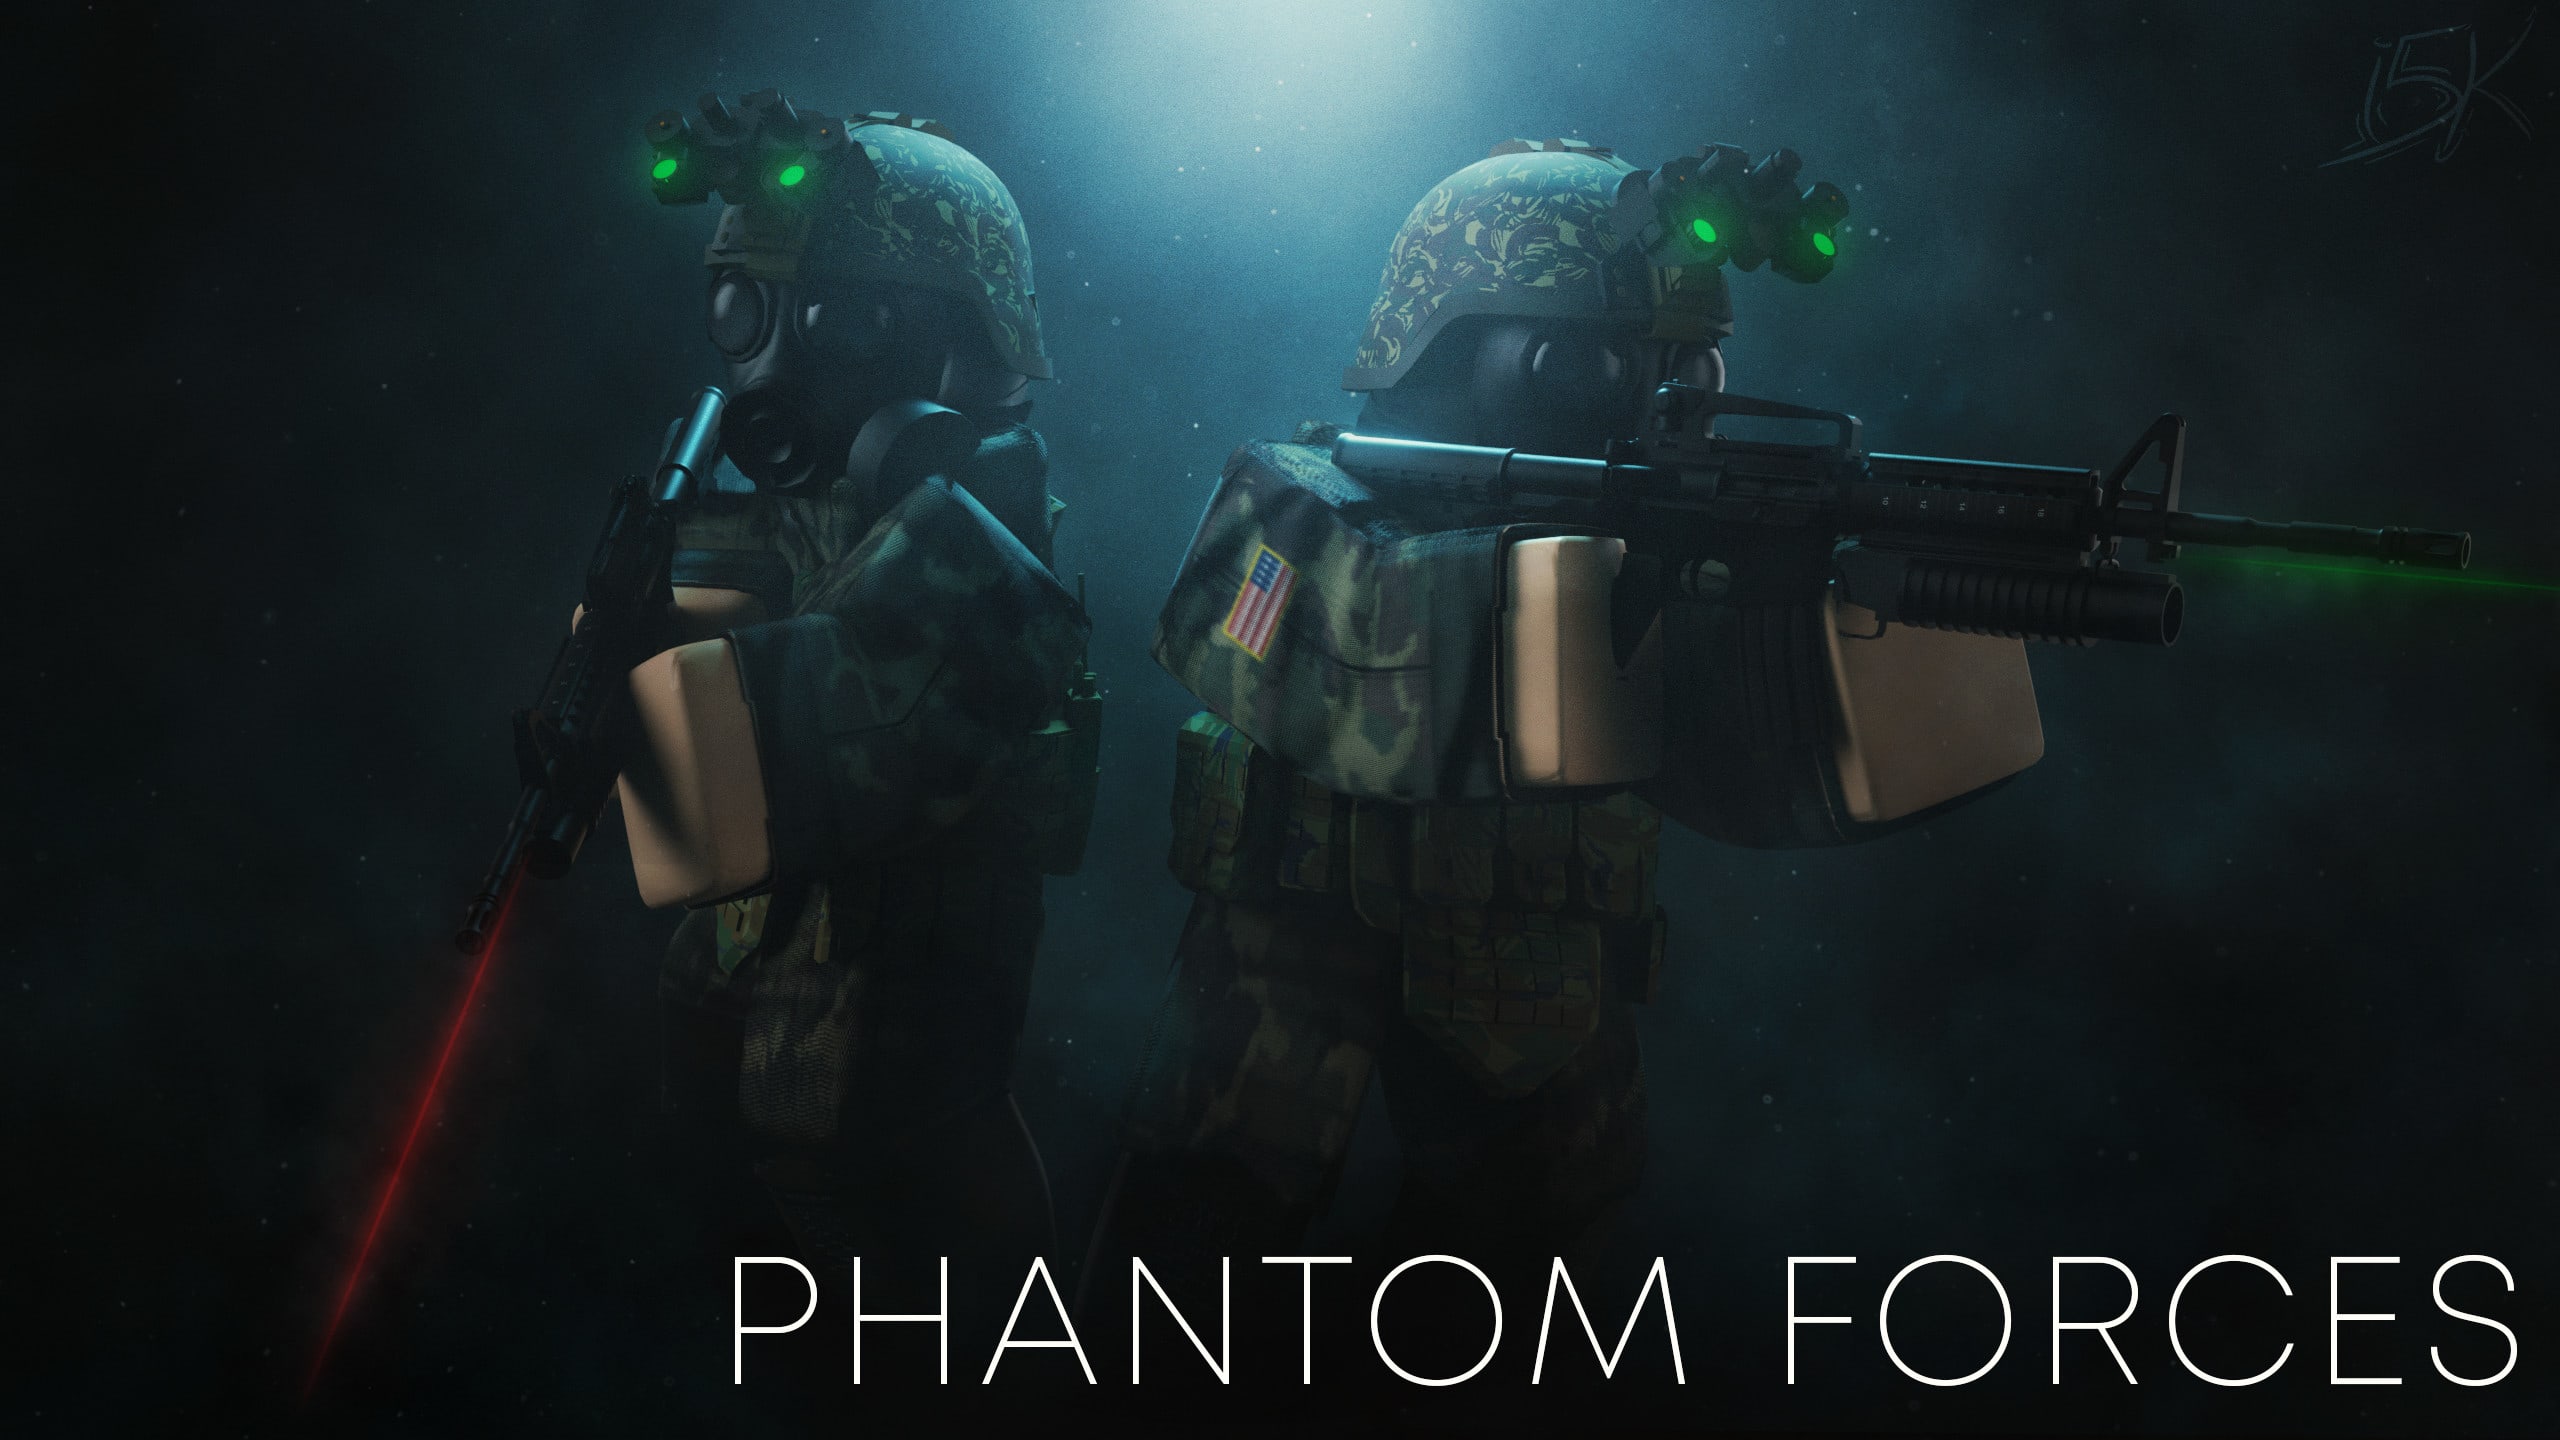 Coach you at phantom forces or rank up account by Unholydevoe